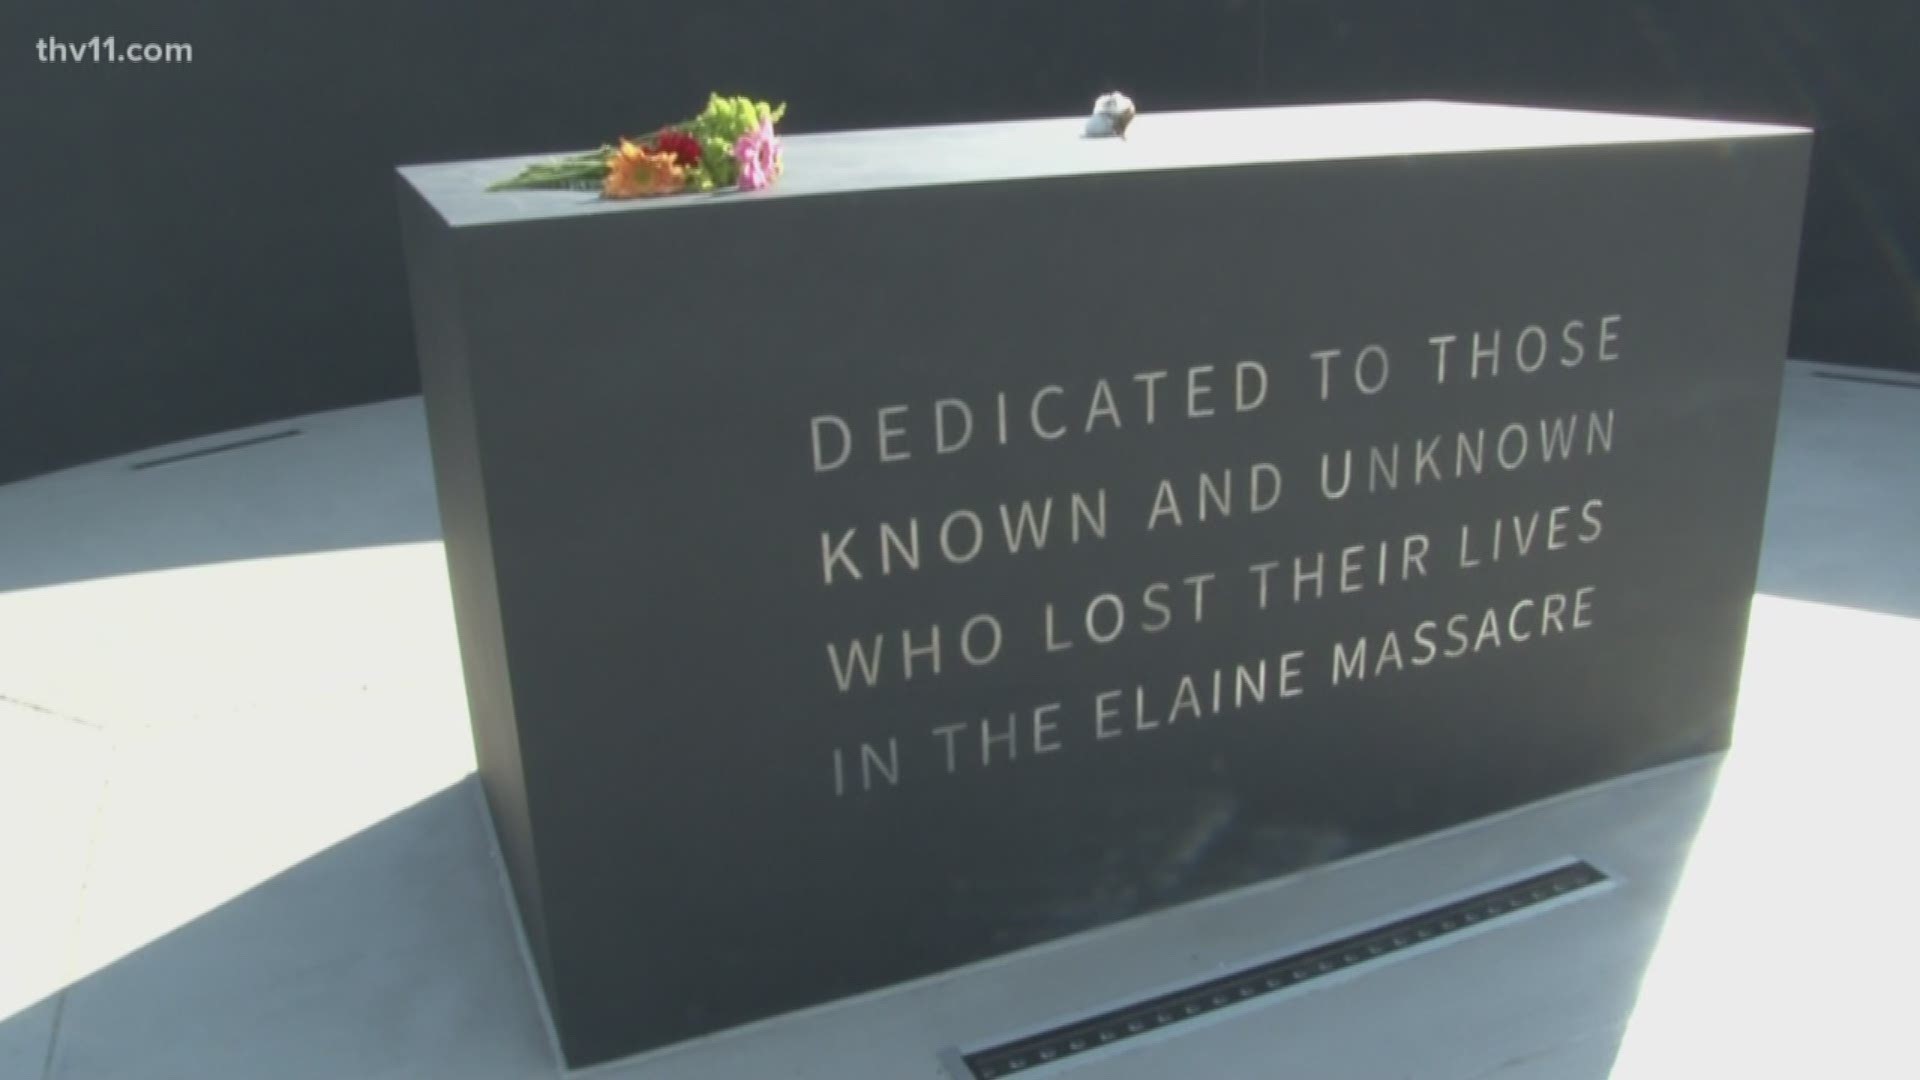 A memorial now honors one of the key figures to emerge from the Elaine Massacre on the Arkansas Delta. The ceremony meant a lot to the heroes' families.